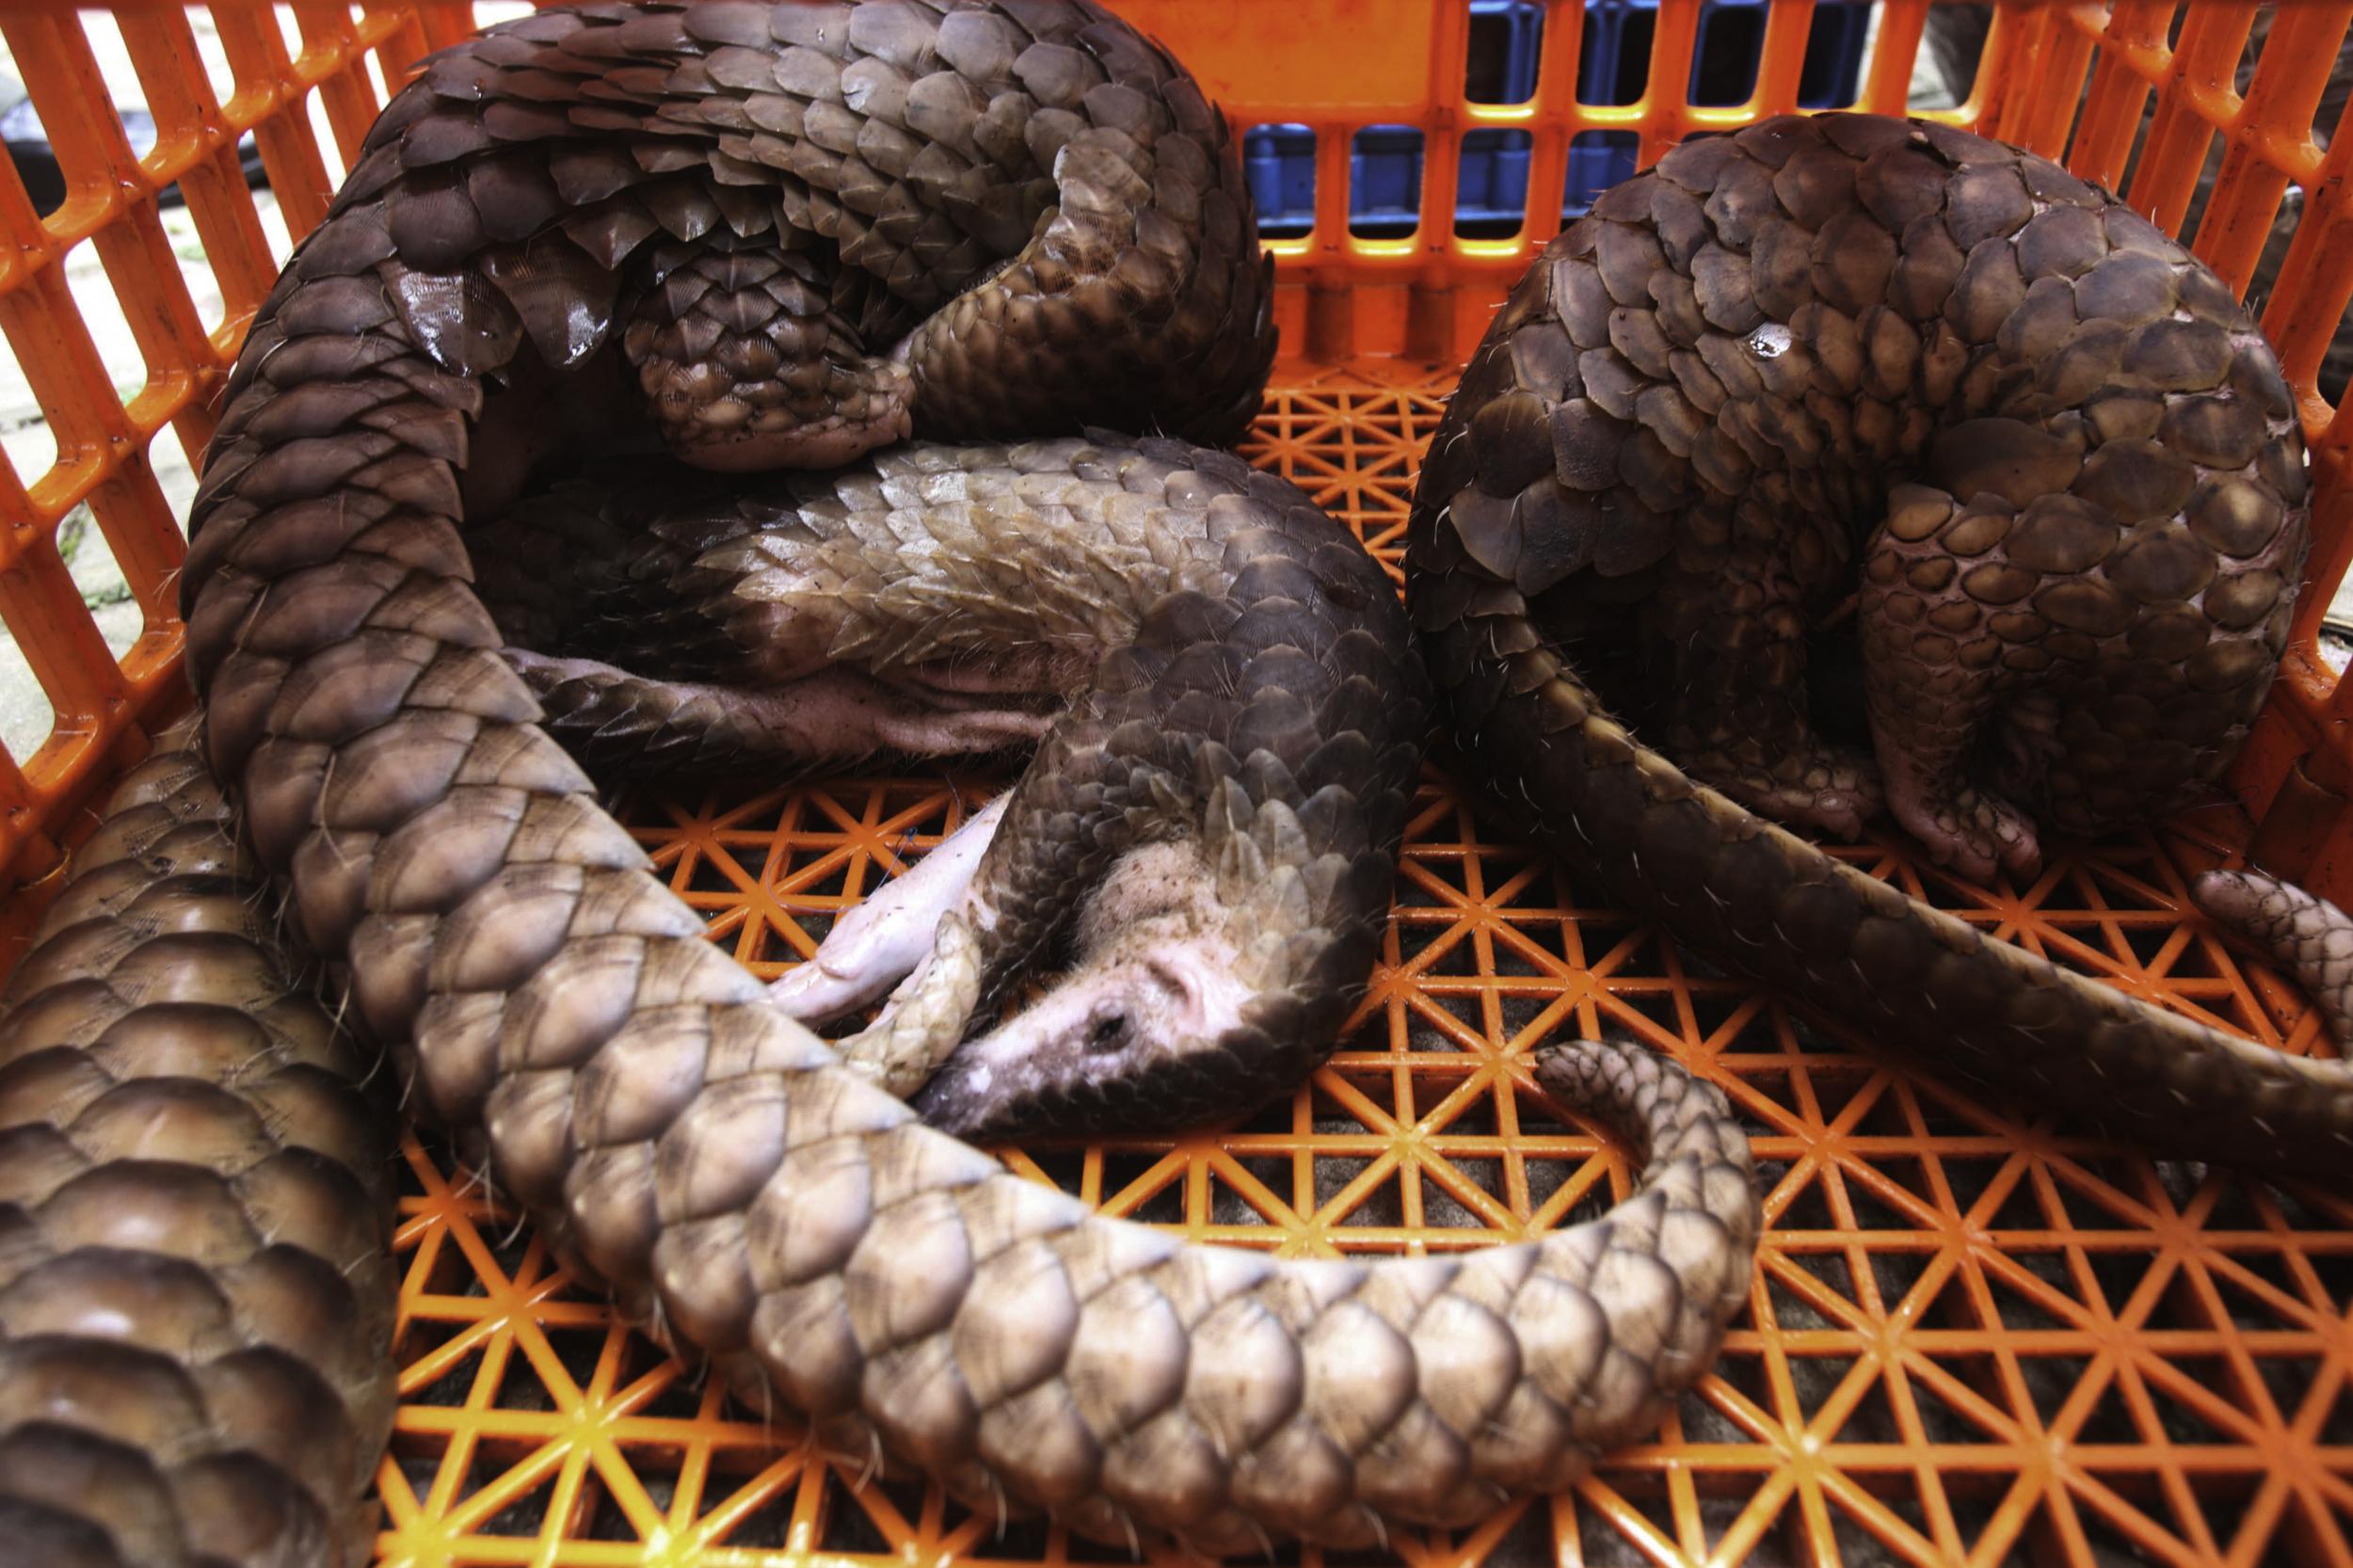 Illegal trade in pangolins is at a record high